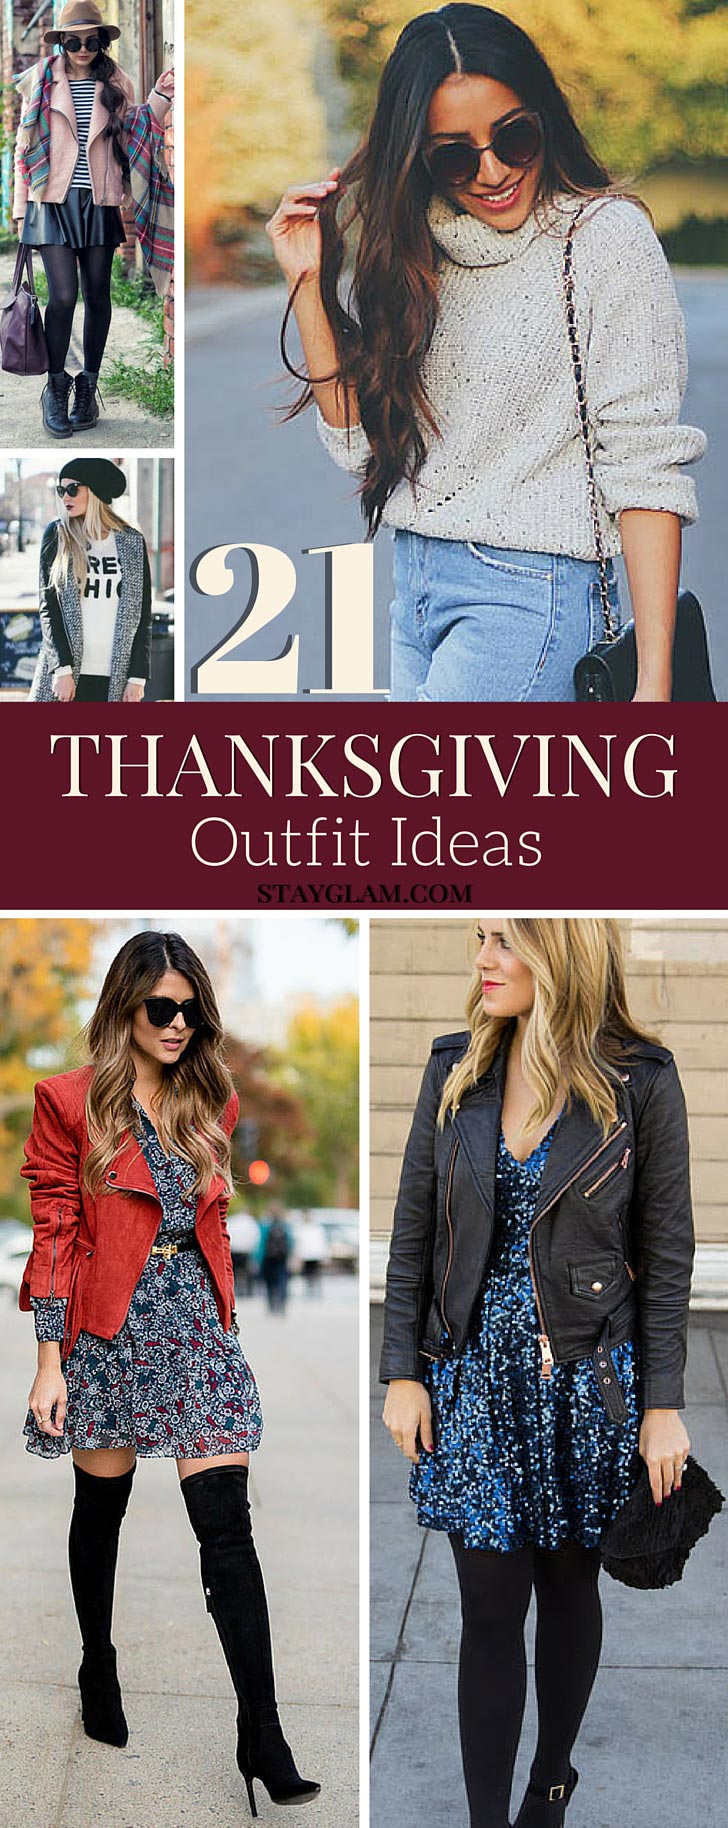 21 Comfy Stylish Thanksgiving Outfits